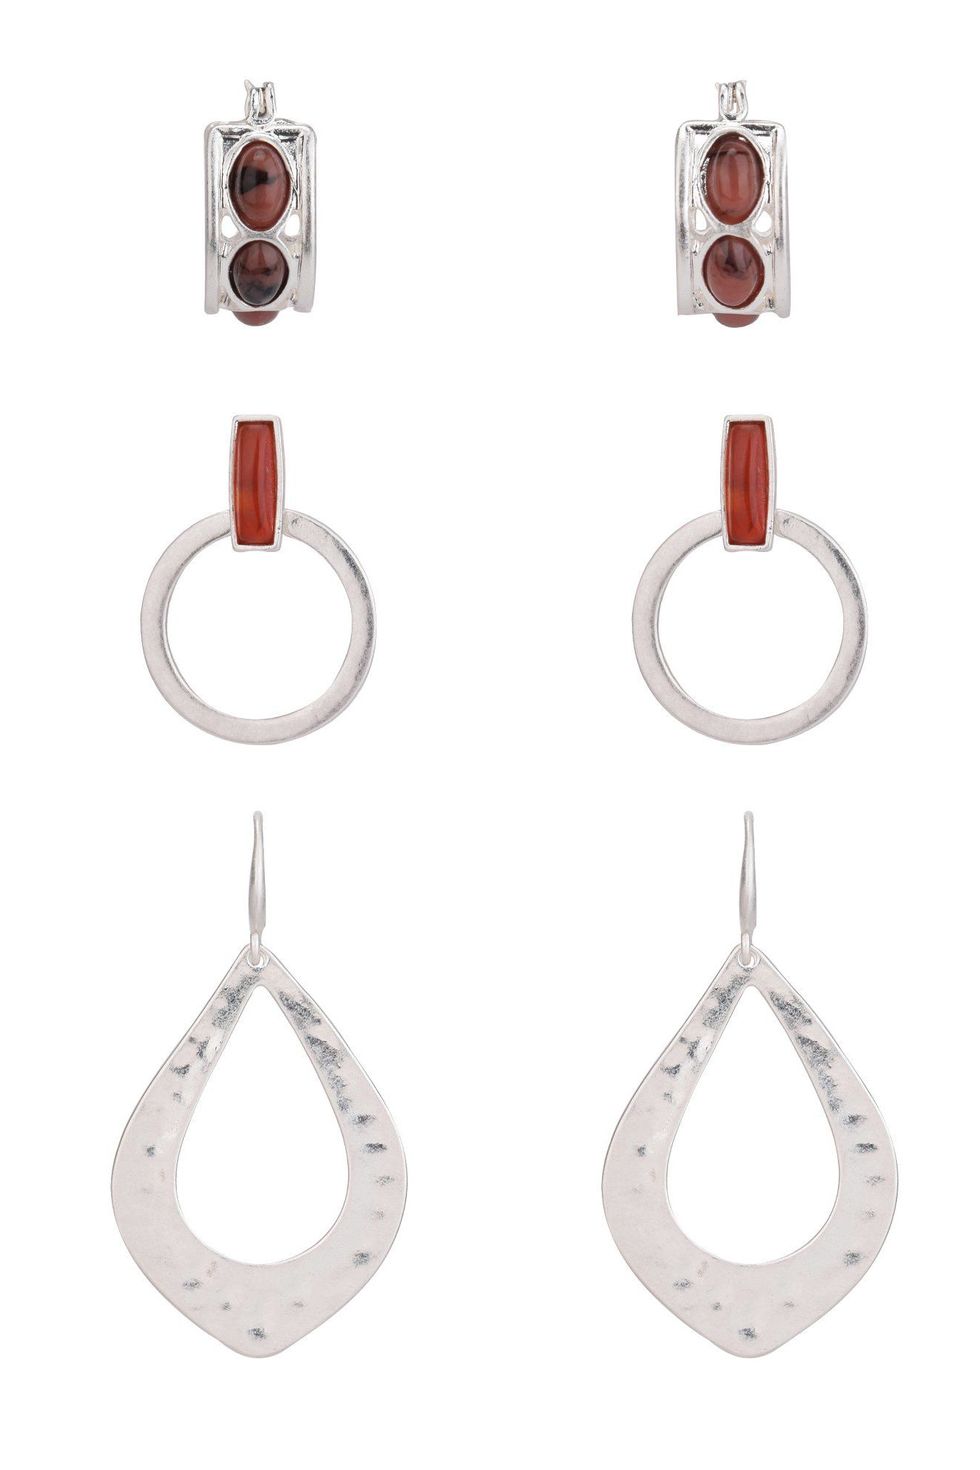 The Pioneer Woman Jewelry, Soft Silver-tone Metal Trio Earring Set with Semi-Precious Stone Accents